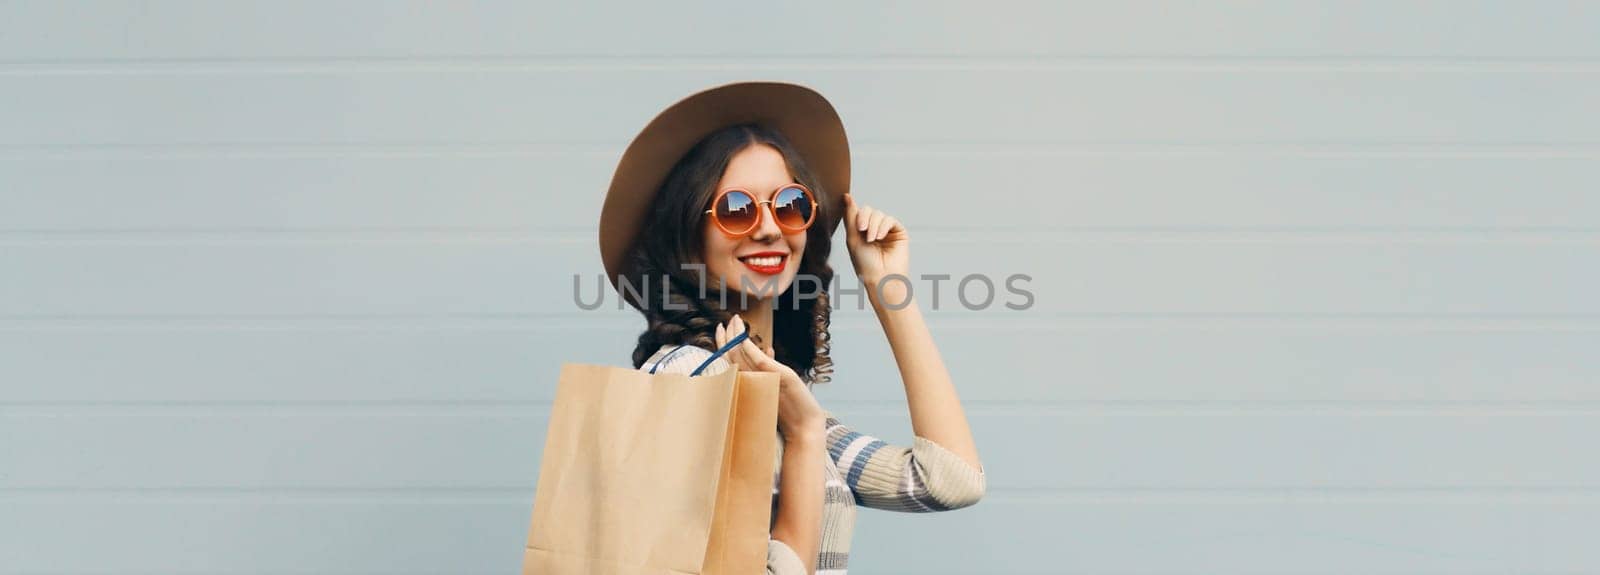 Stylish beautiful happy smiling young woman posing with shopping bags in round hat, dress on city street, gray wall background